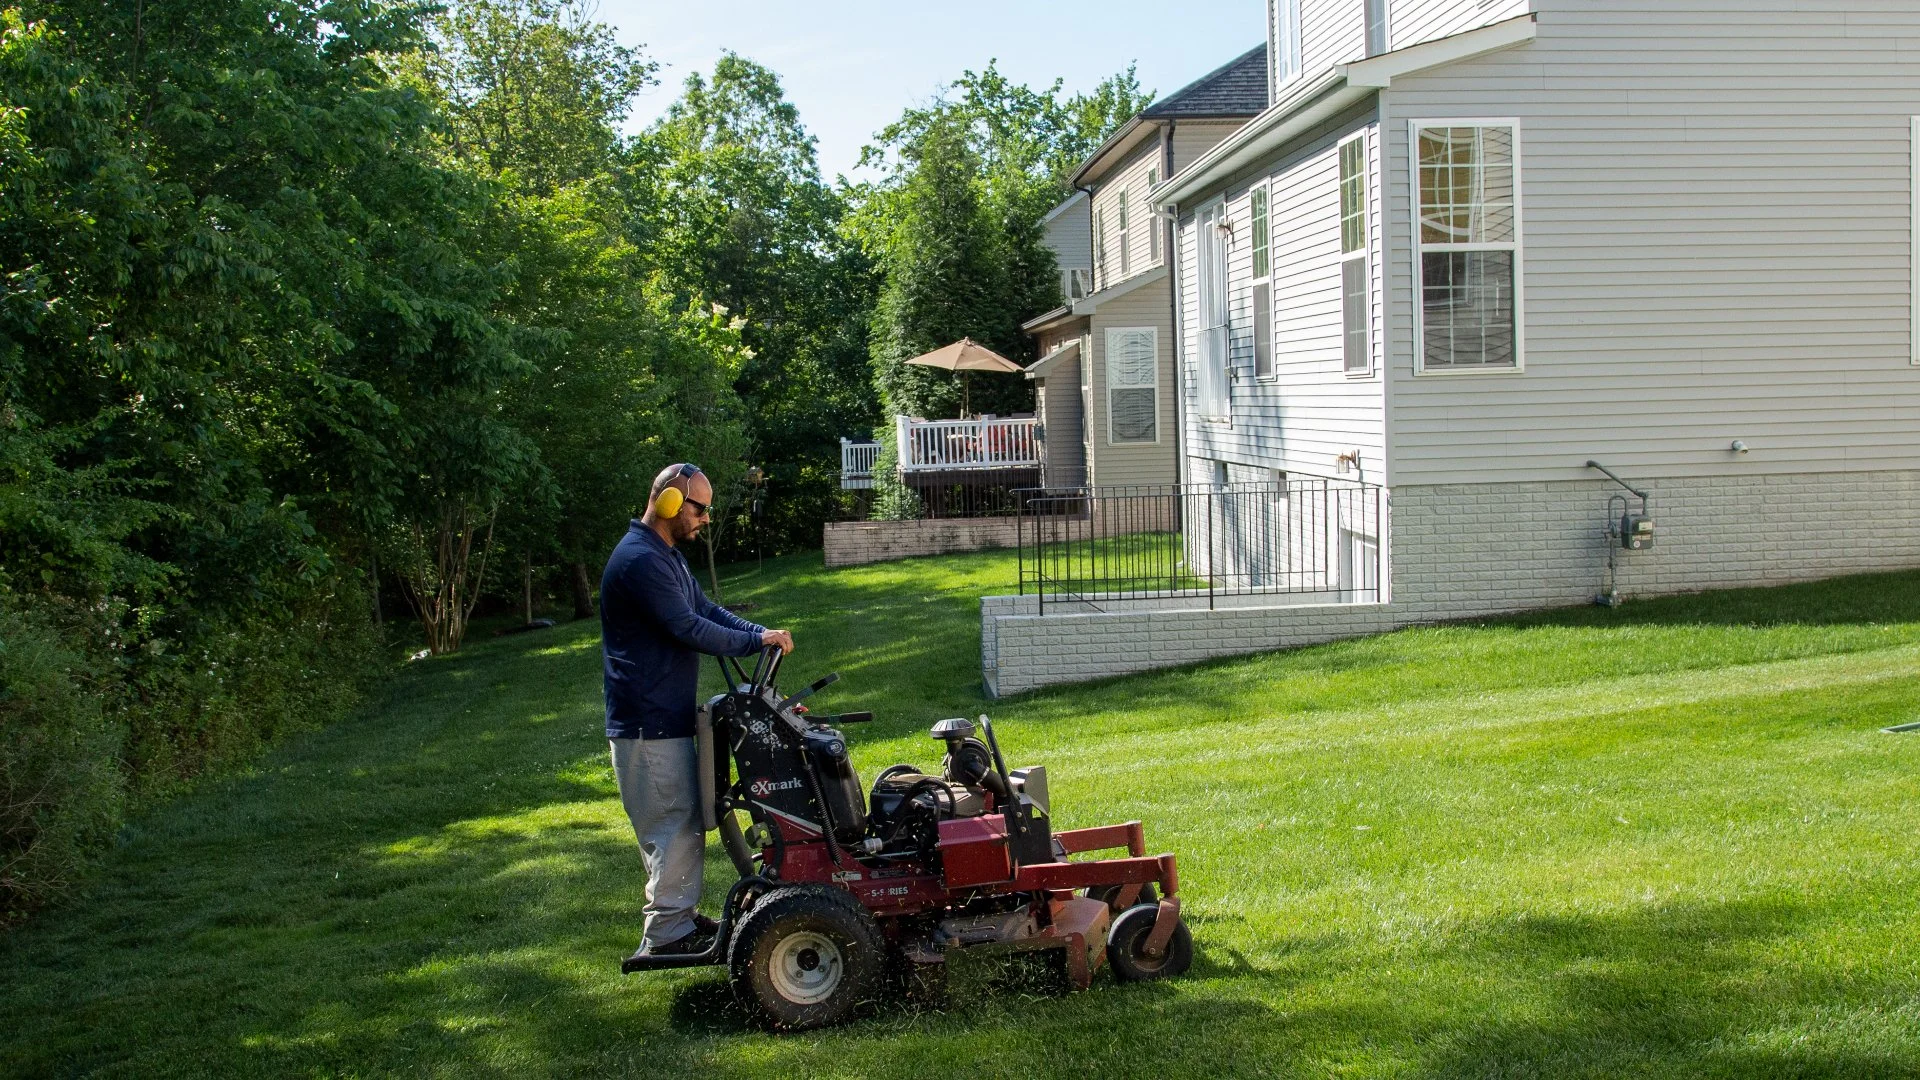 Our lawn maintenance professional mowing a lawn for a client in Haymarket, VA.